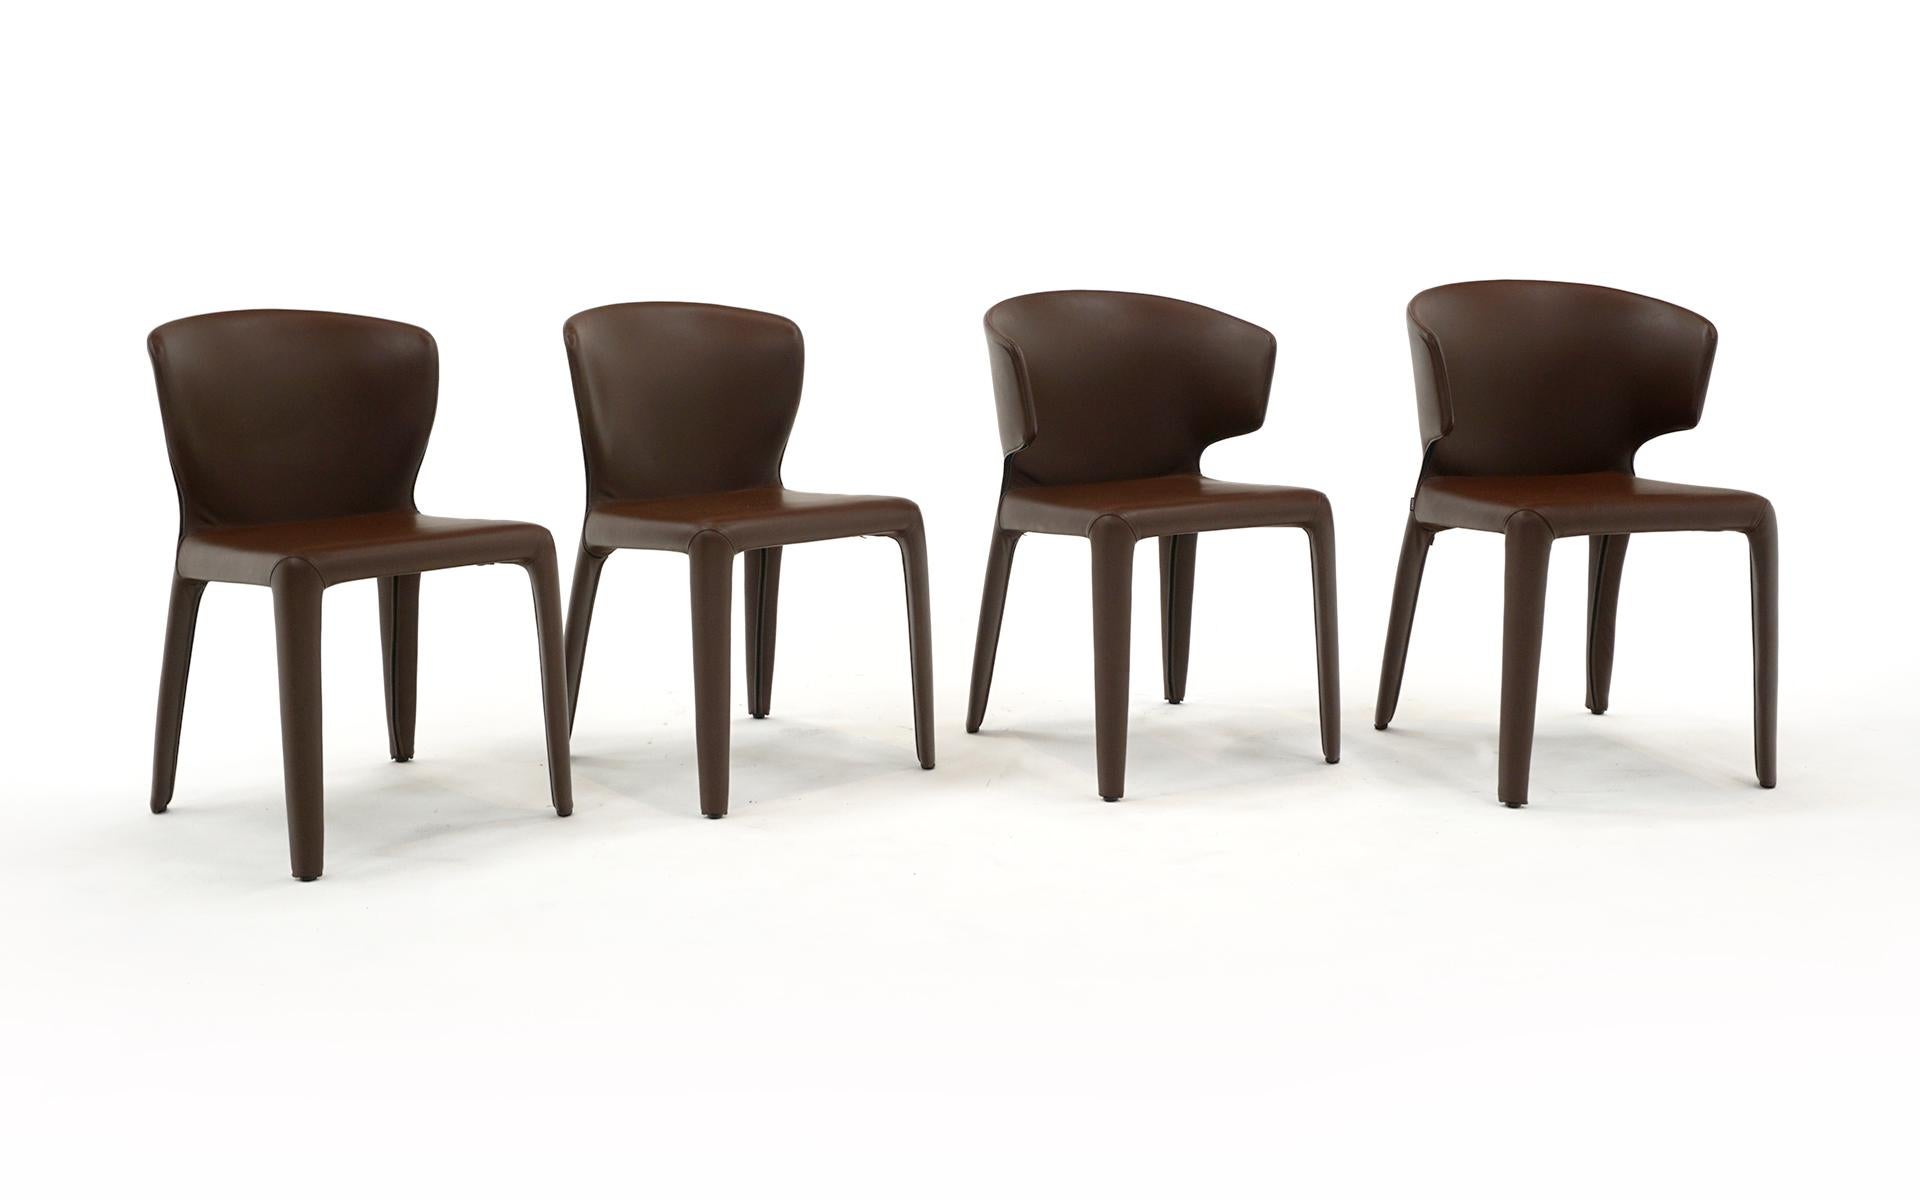 Set of four Hola dining chairs in dark brown leather designed by Hannes Wettstein. An internal steel structure is padded with cfc-free polyurethane foam. The frame is completely covered in leather (cover removable). Feet made of black plastic. These